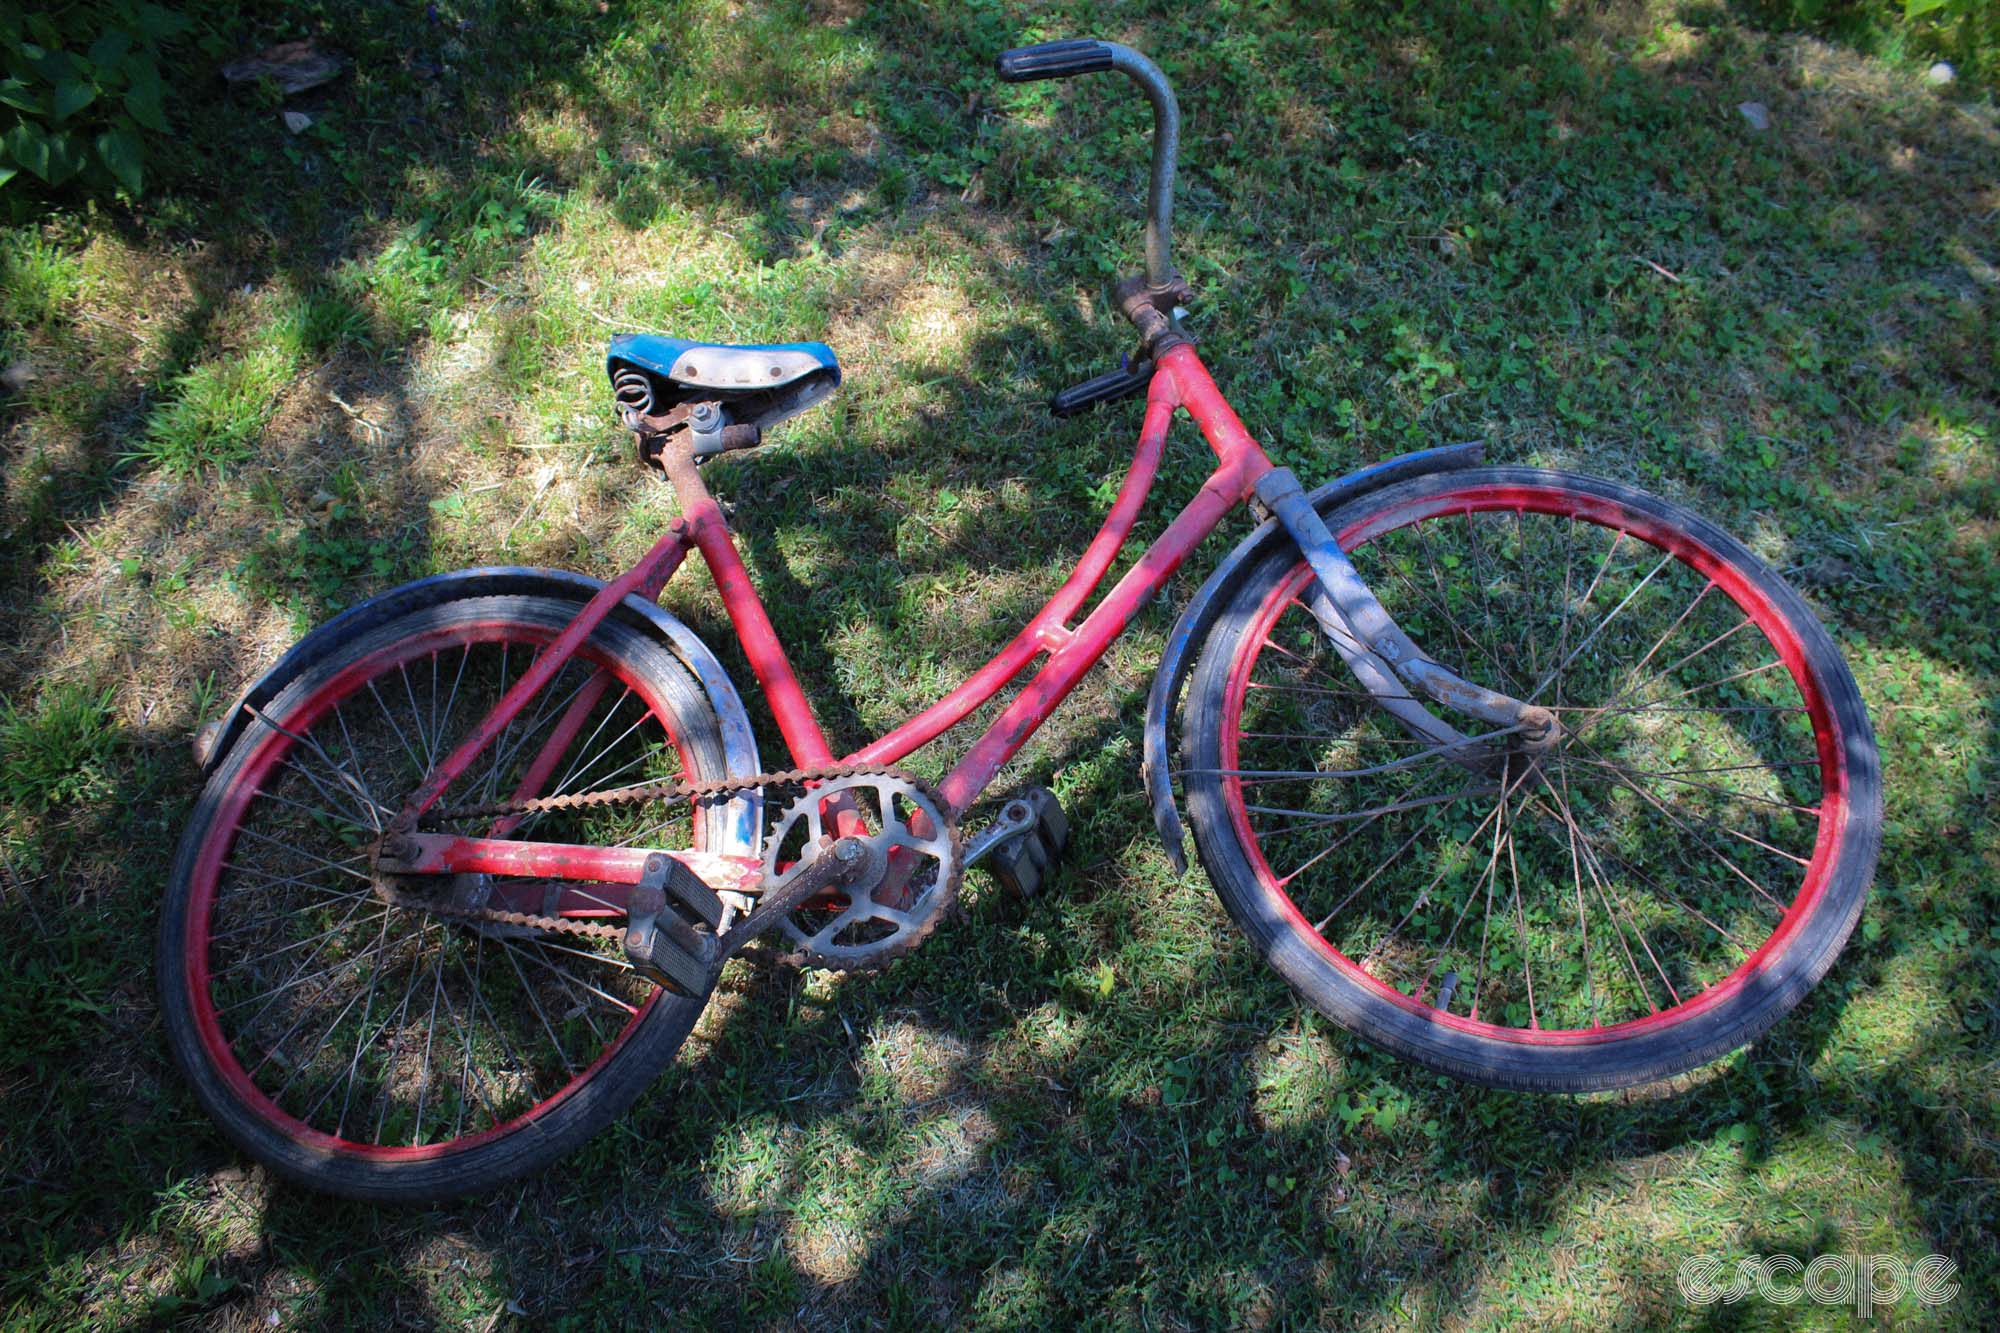 The old red bike lies on grass, dappled in shade. 